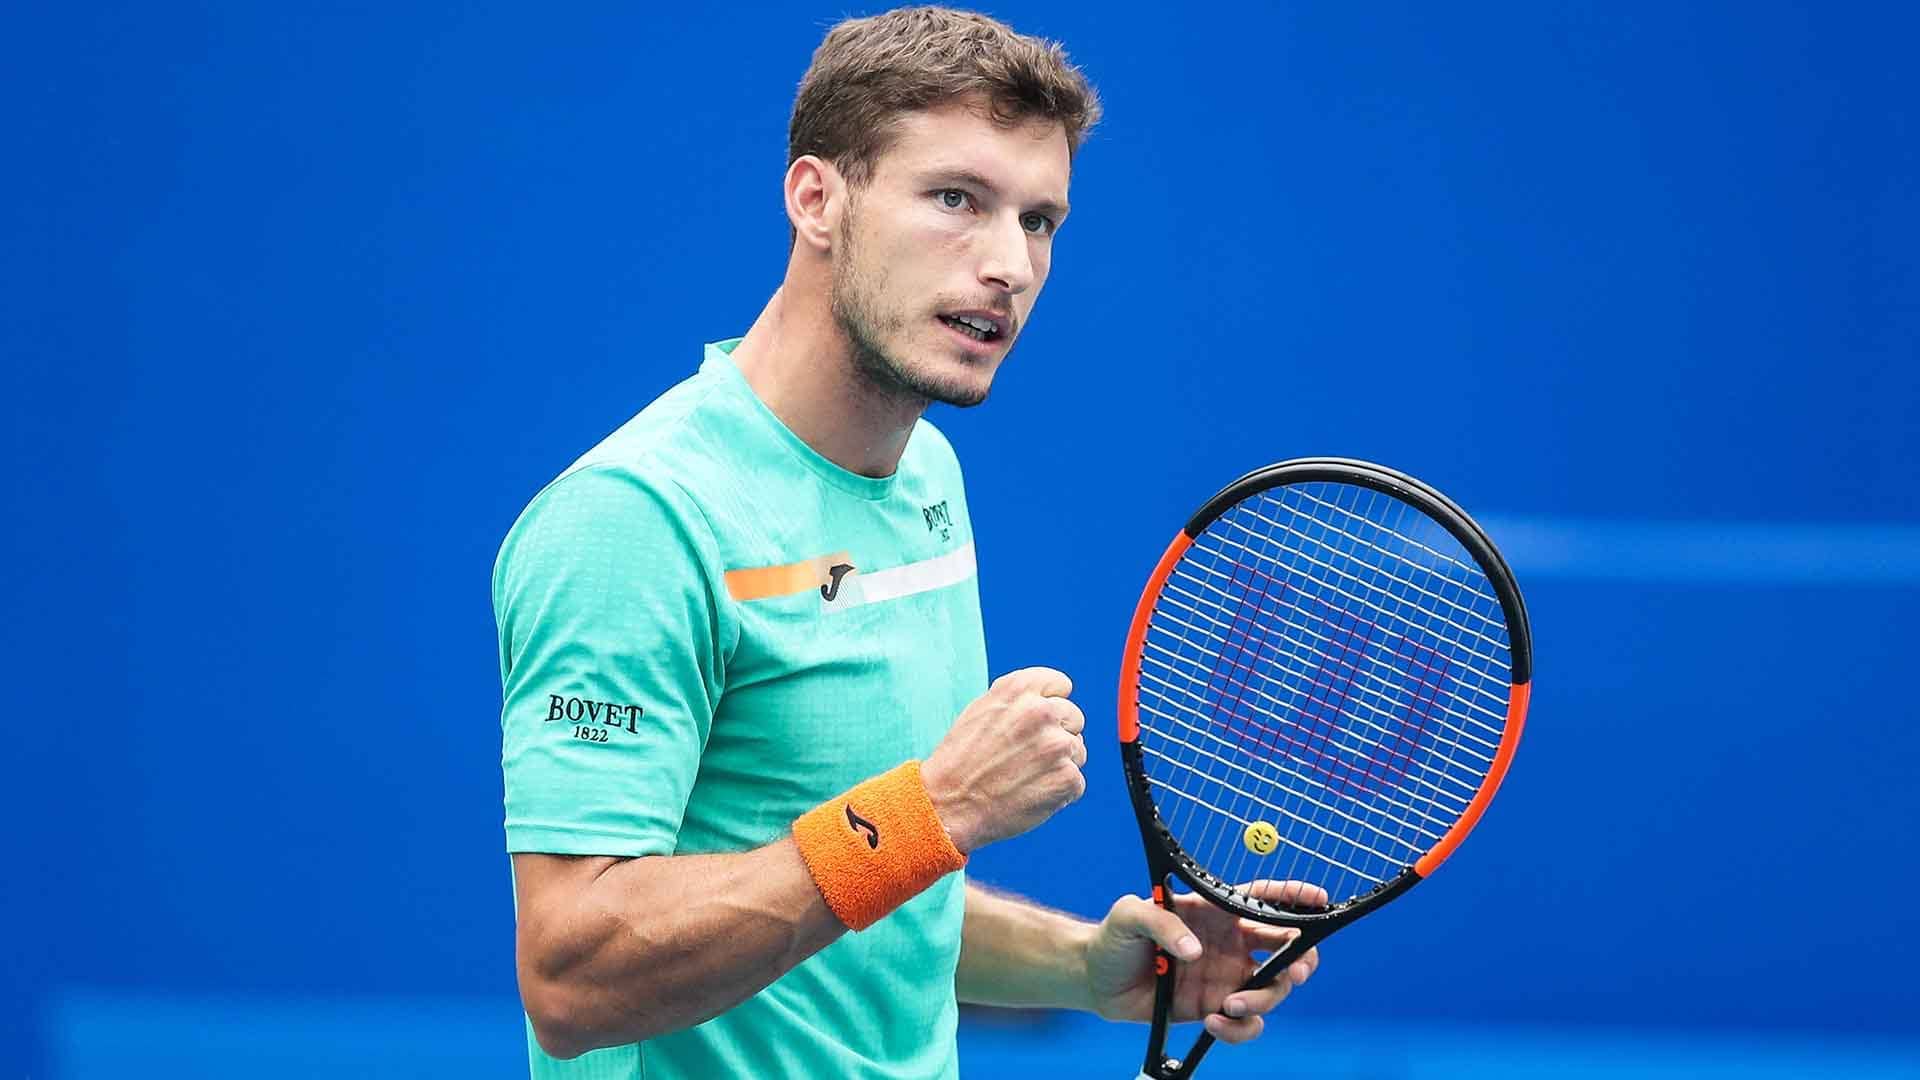 Pablo Carreno Busta improves to 24-17 at tour-level this year.